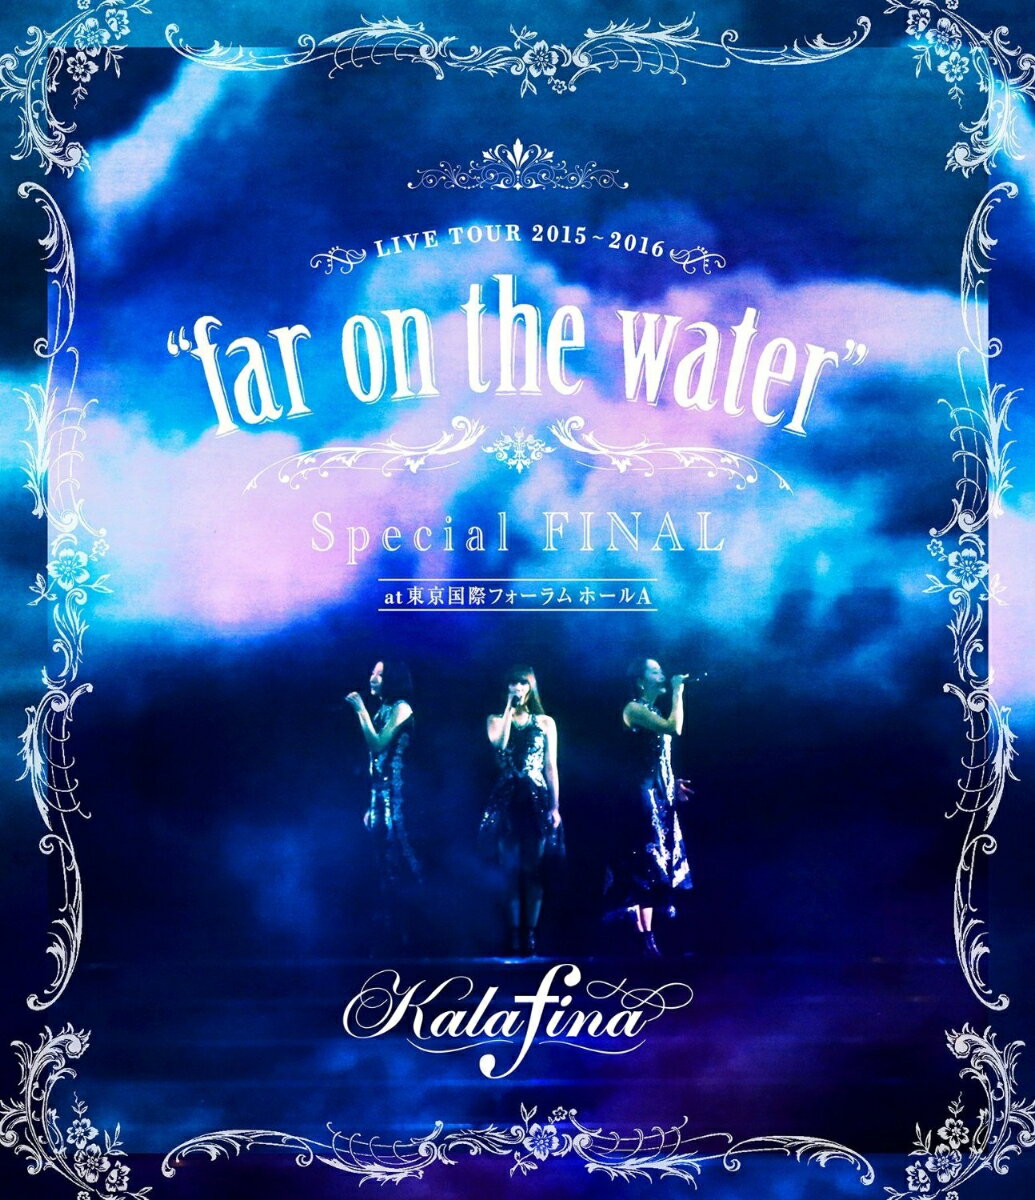 Kalafina LIVE TOUR 2015〜2016 “far on the water" Special FINAL at 東京国際フォーラムホールA【Blu-ray】